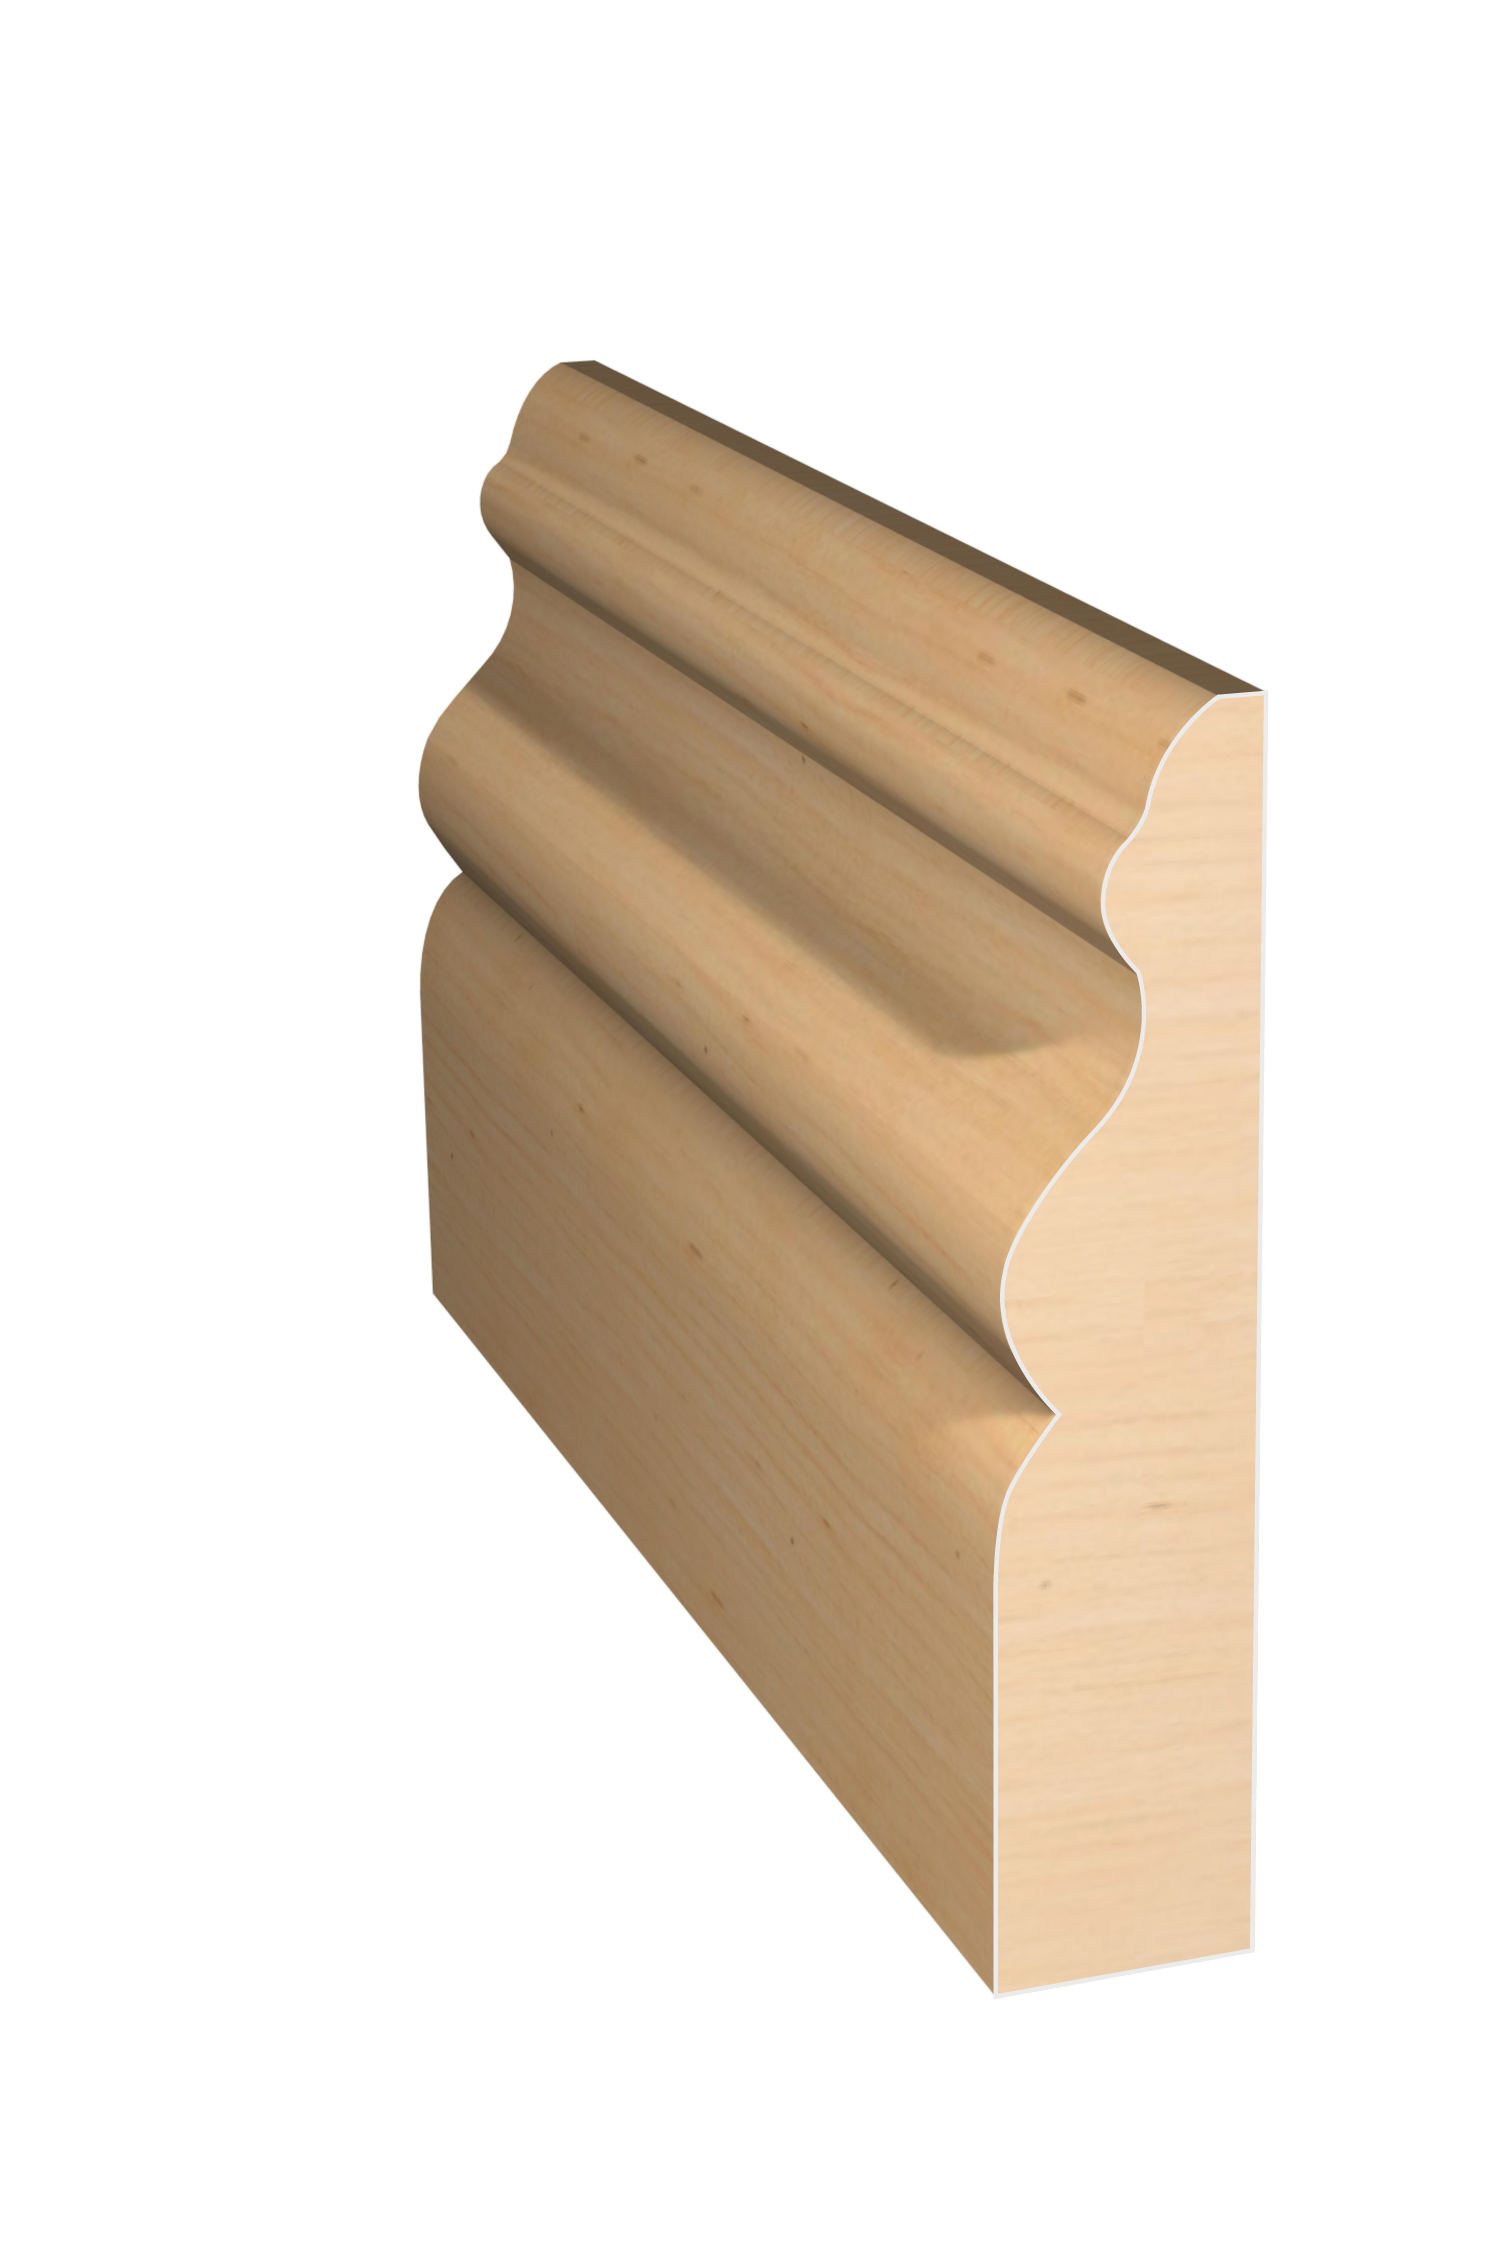 Three dimensional rendering of custom casing wood molding CAPL31225 made by Public Lumber Company in Detroit.